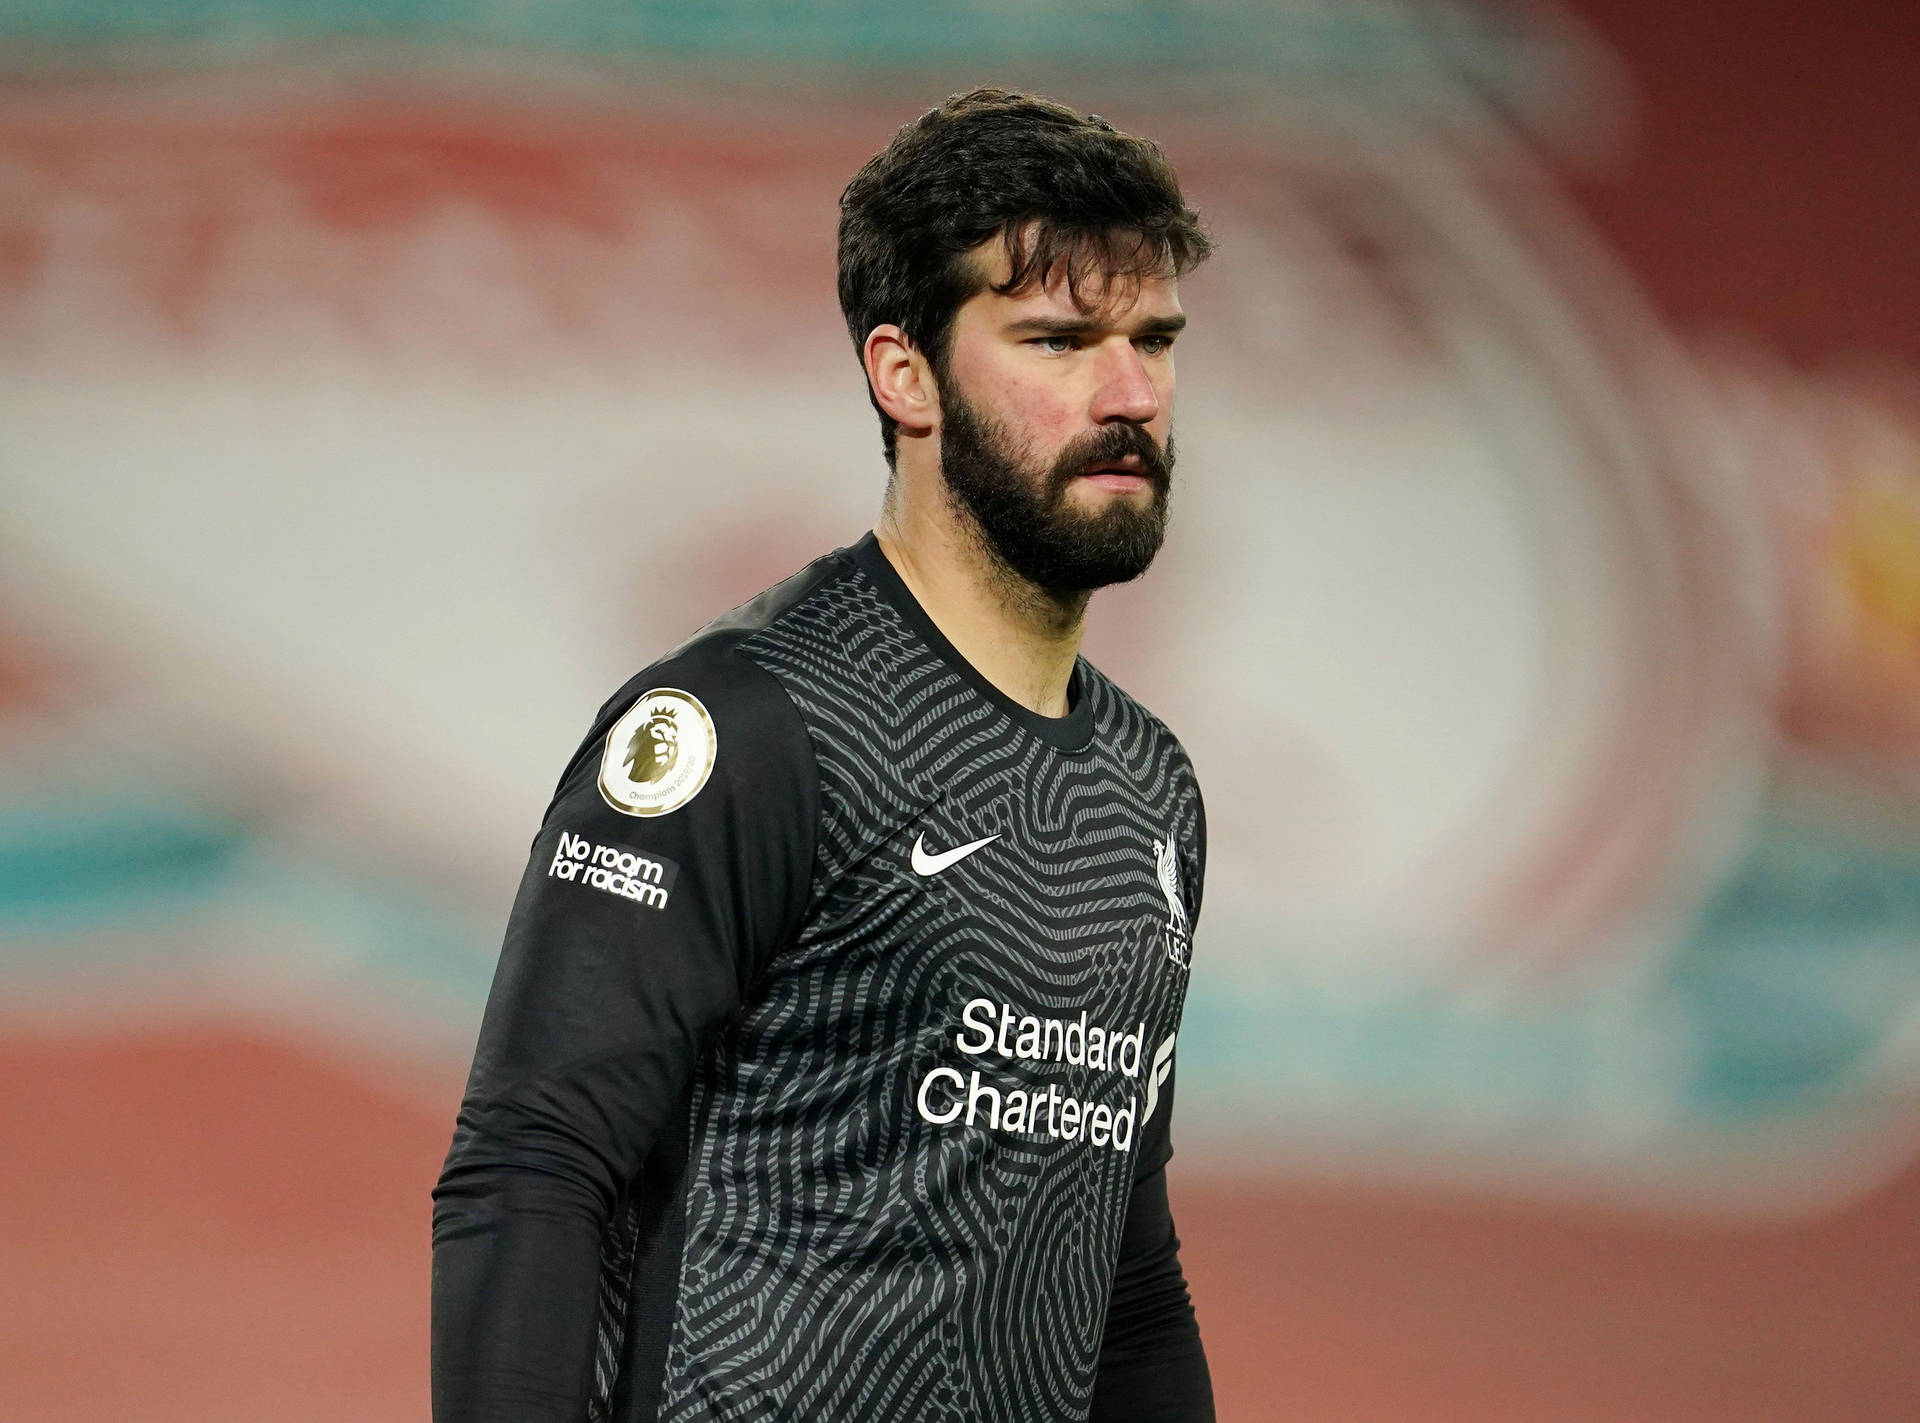 Top 999+ Alisson Becker Wallpaper Full HD, 4K Free to Use